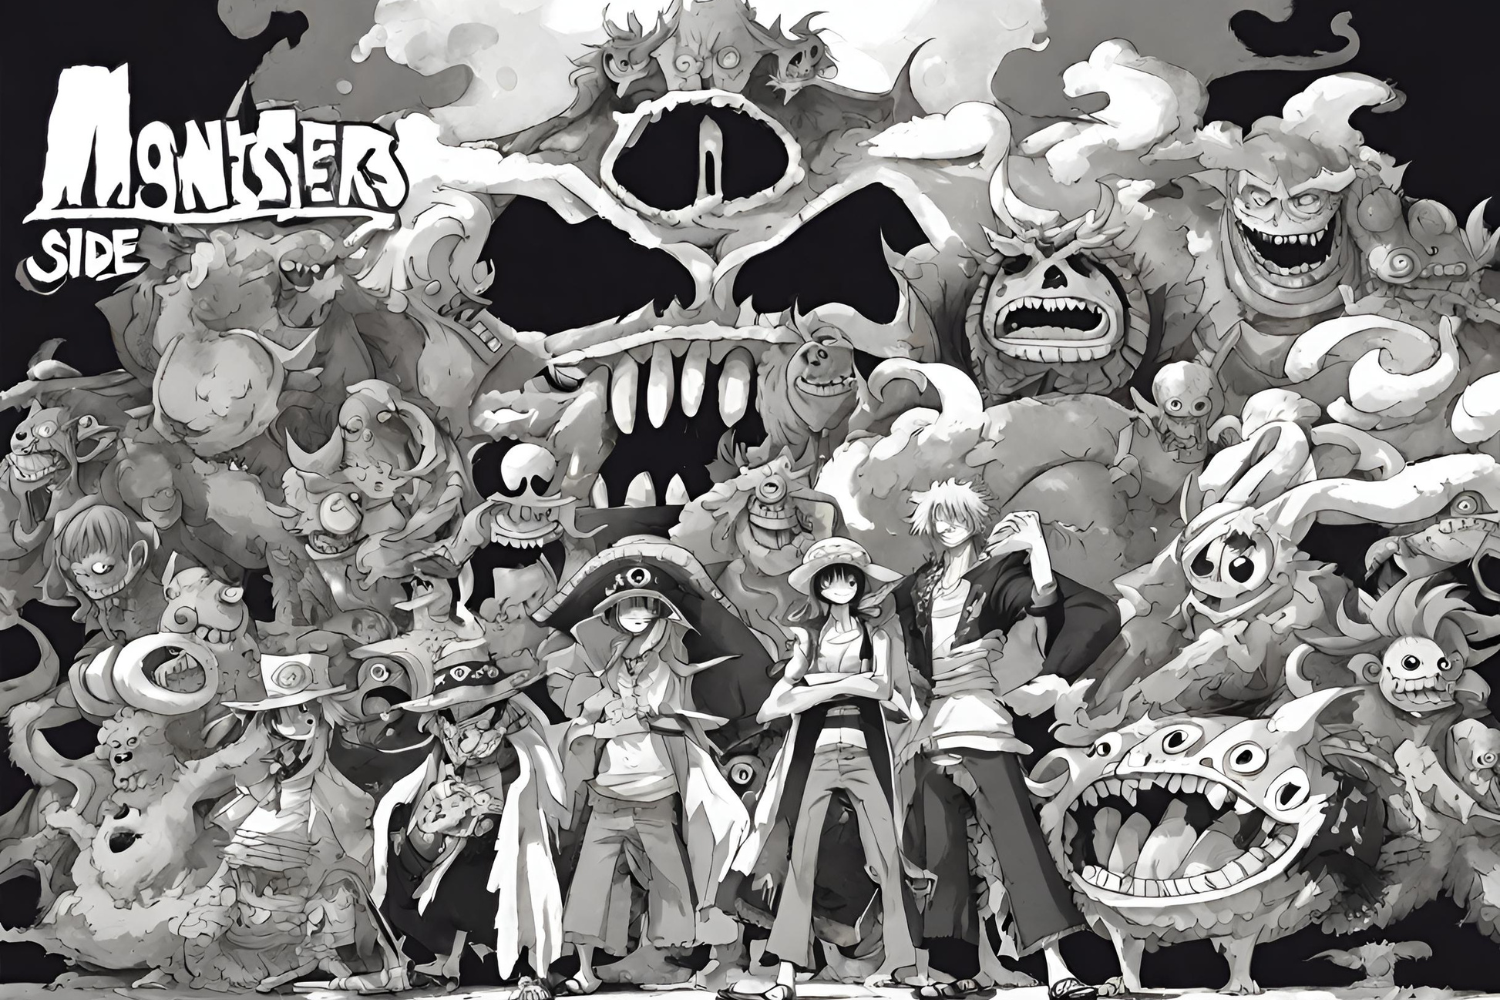 Monsters: side story from One Piece is scheduled to air in 2024